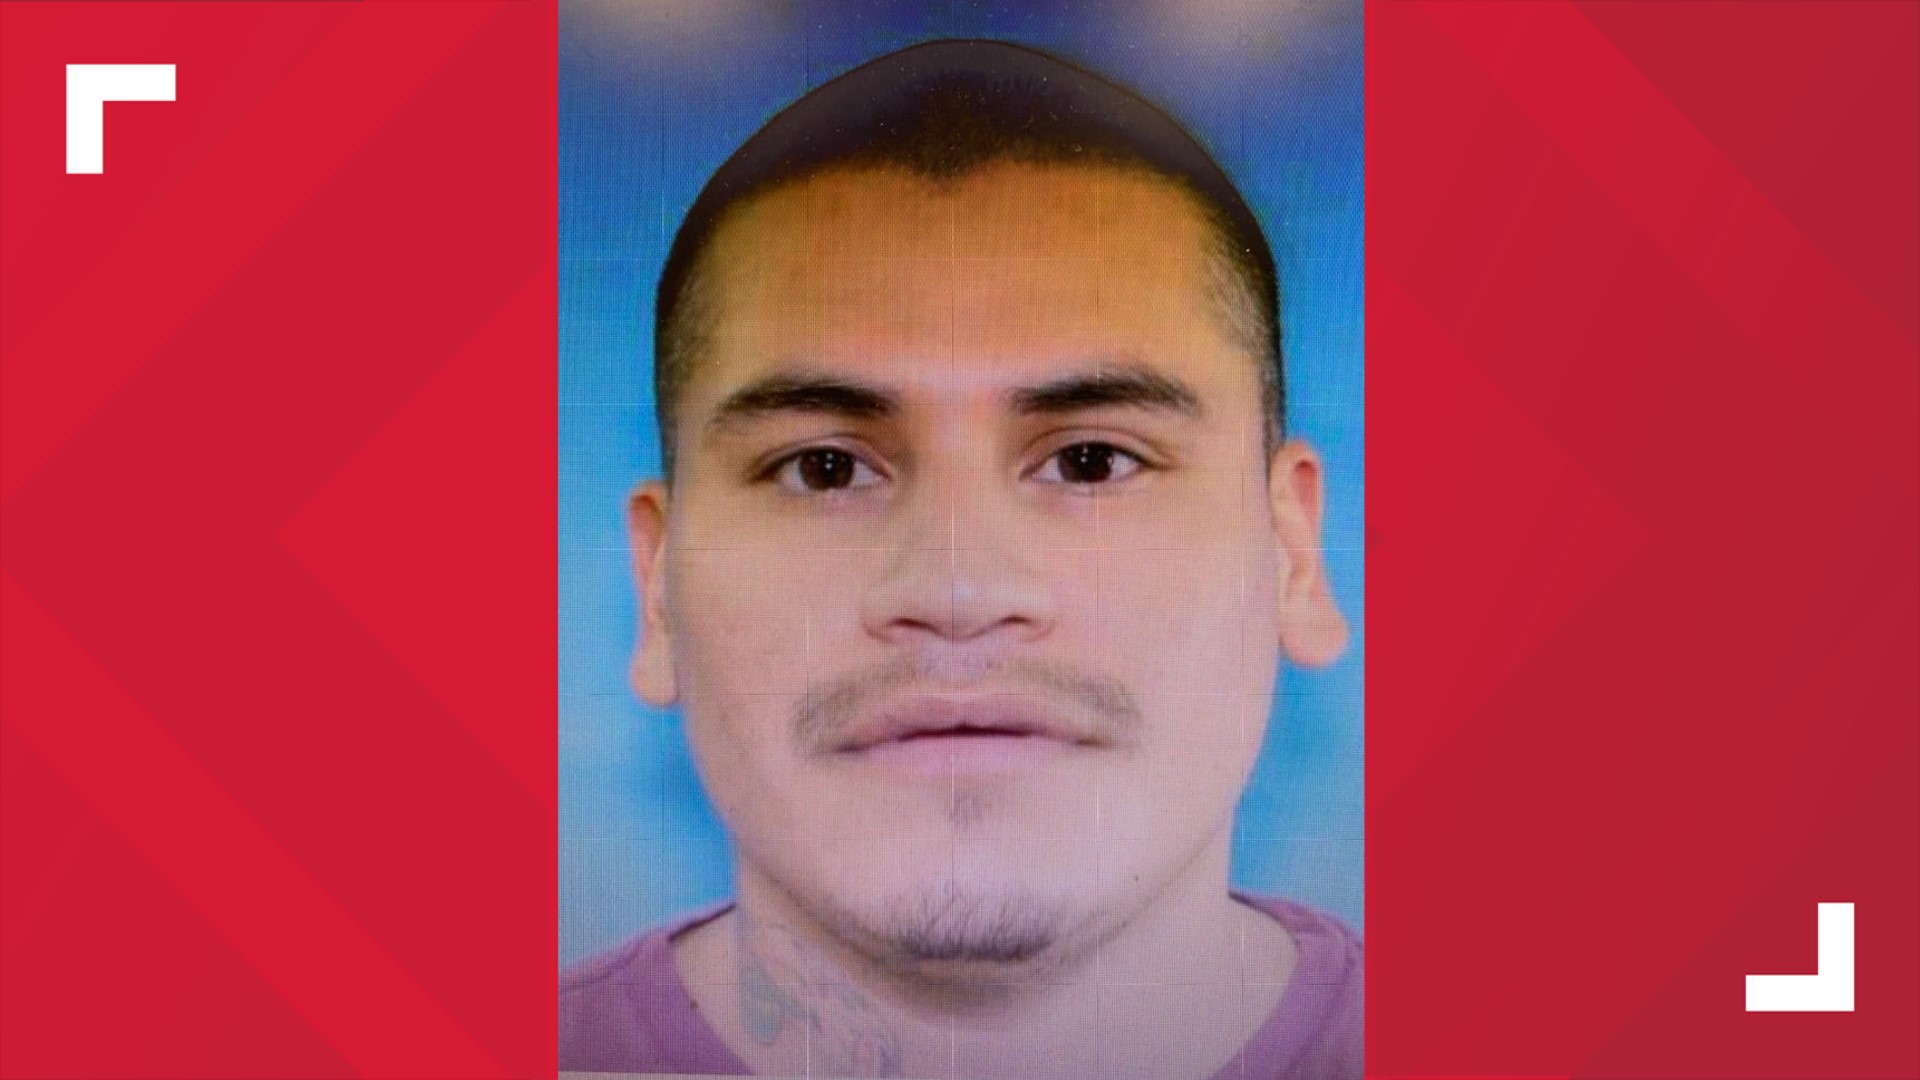 The inmate, Randy Garza, is described as a white man who is 5-foot-11-inches tall and 180 lbs., with black hair and brown eyes.